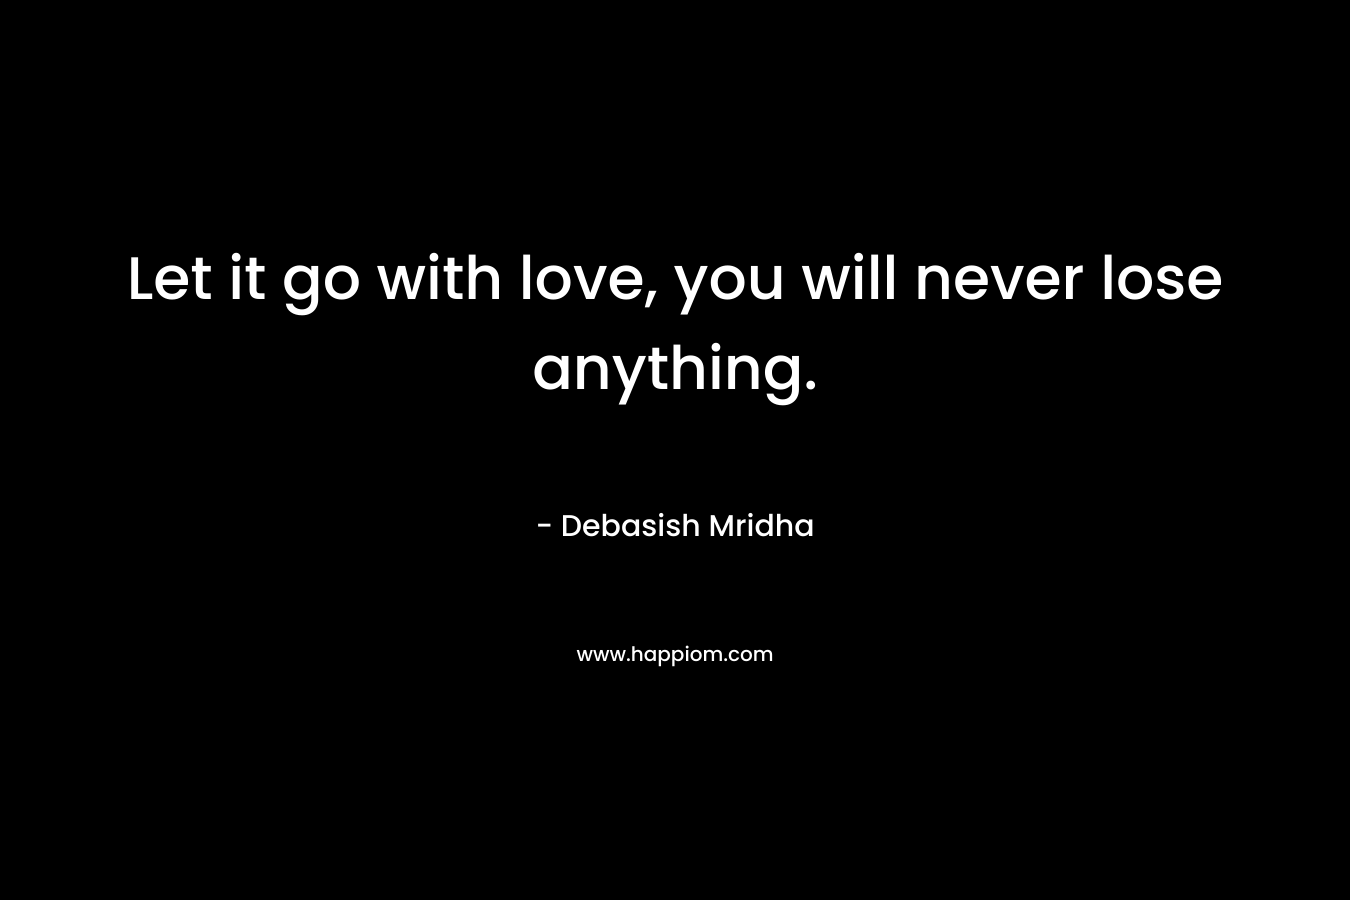 Let it go with love, you will never lose anything.